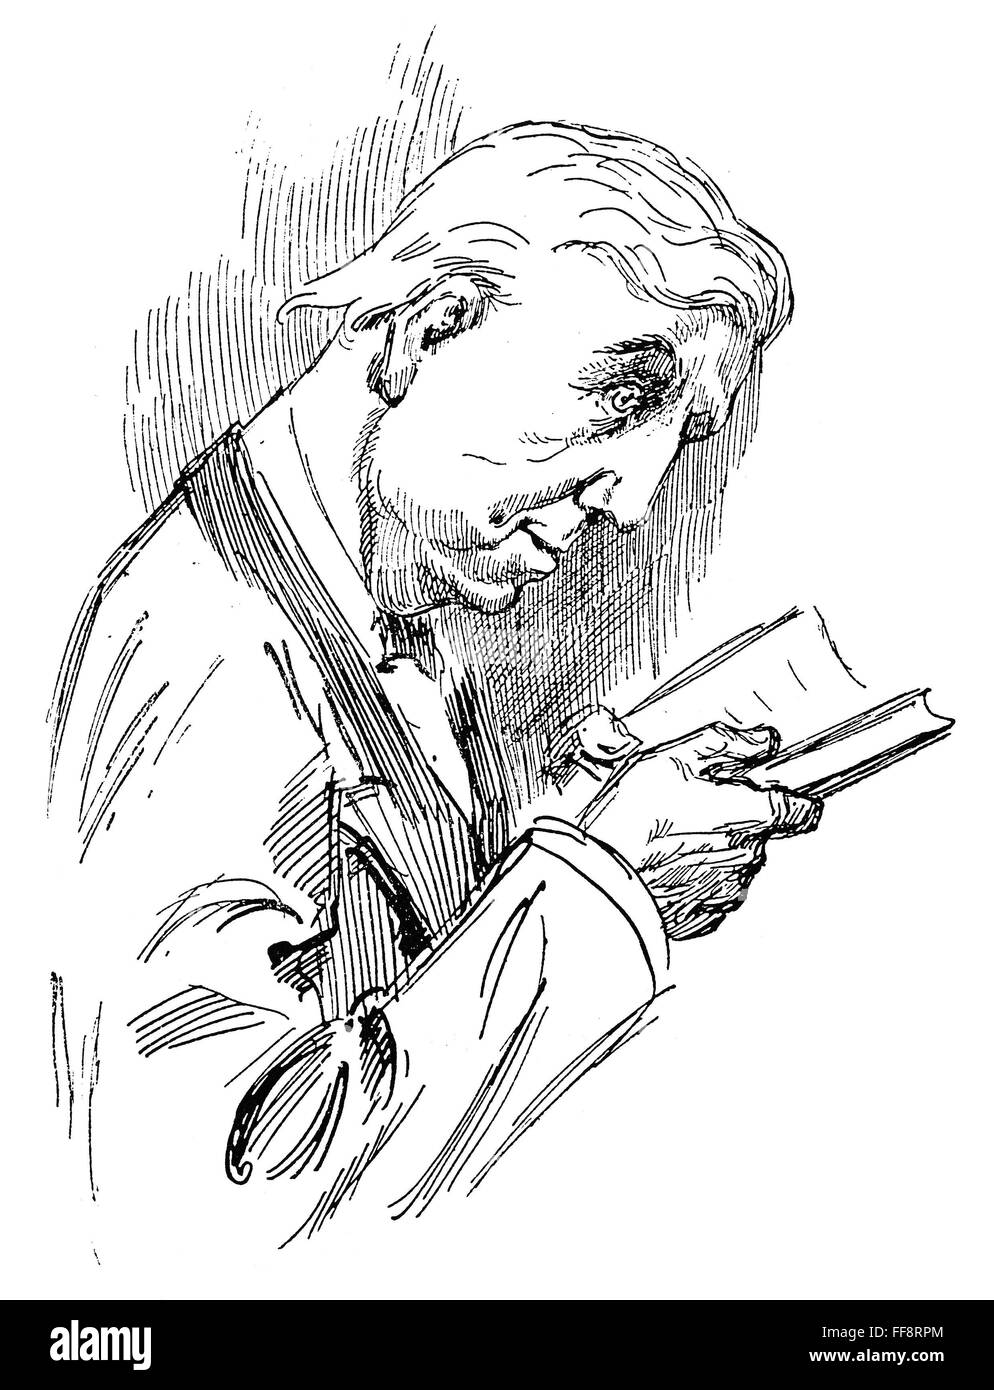 CHARLES L. DODGSON /n(1832-1898). 'Lewis Carroll.' English writer, photographer and mathematician. Pen-and-ink drawing by Harry Furniss (1854-1925). Stock Photo